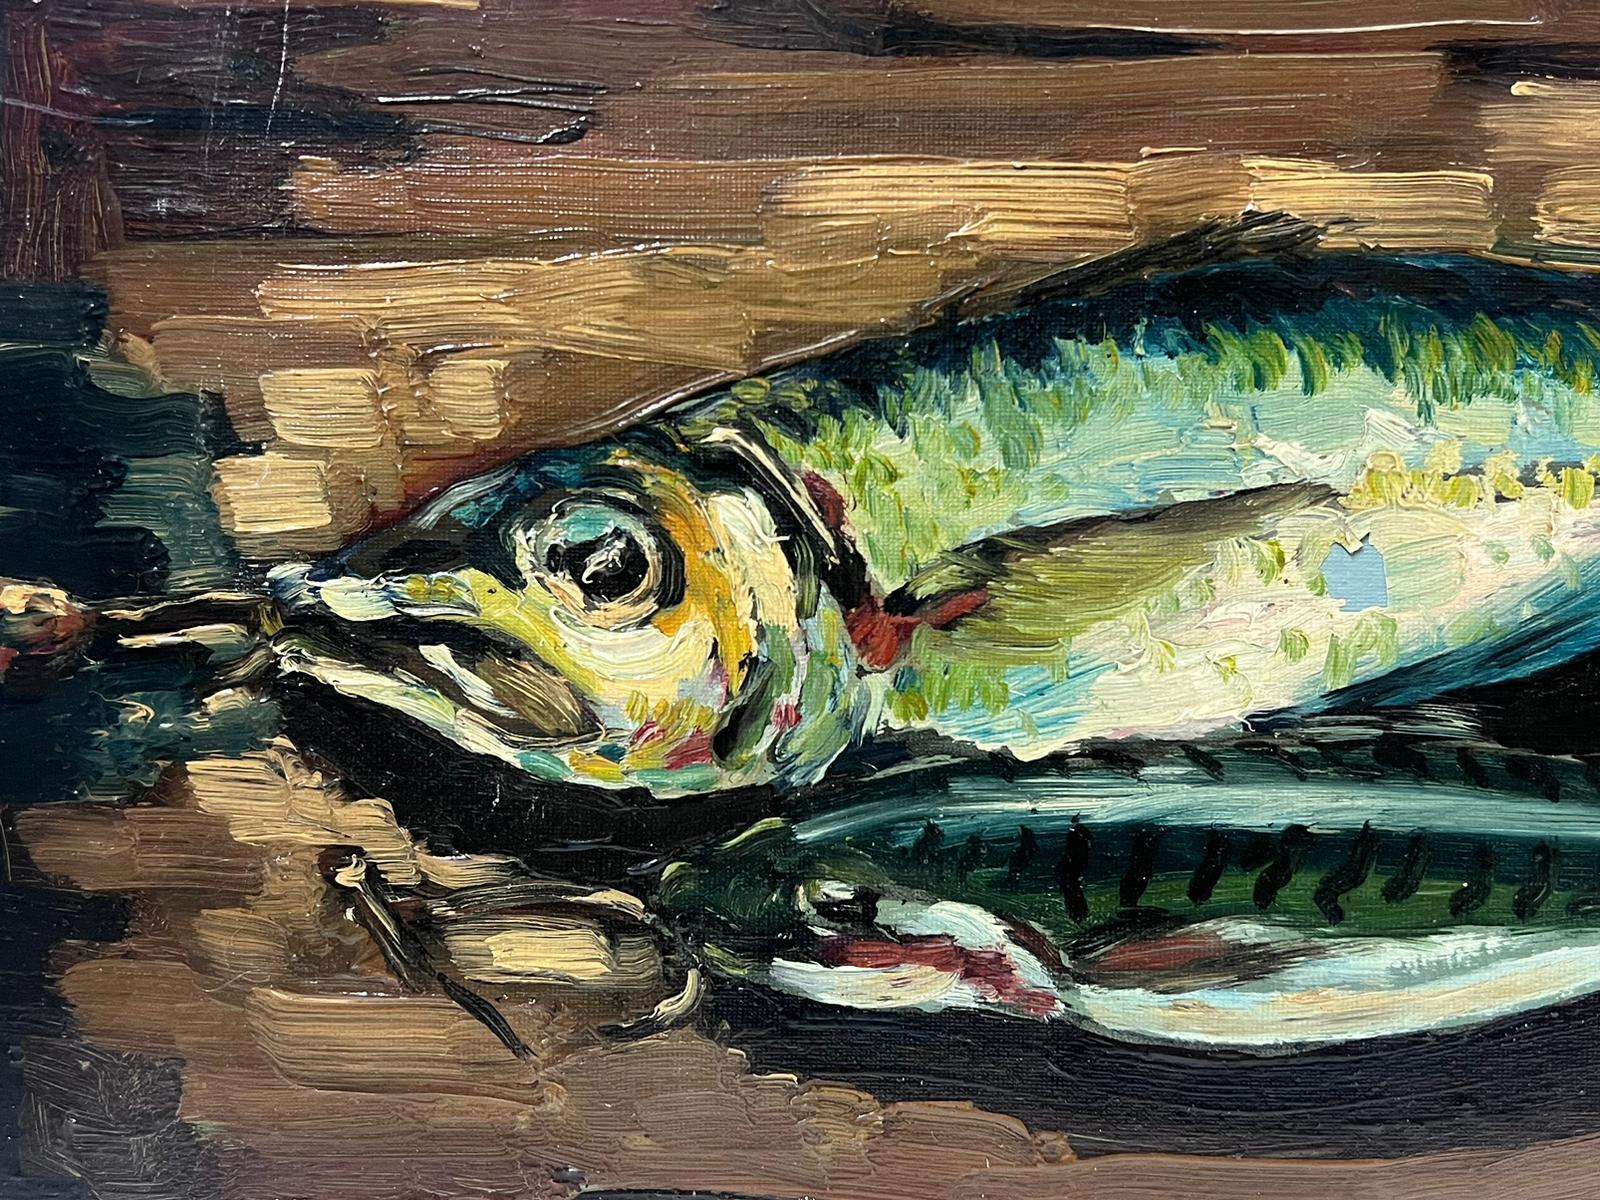 Still Life of Fish
by Georges Bordonave (French contemporary) 
oil painting on canvas, unframed
canvas: 19.75 x 16.75 inches
condition: very good
provenance: from a large private collection of this artists work, western Paris, France. 